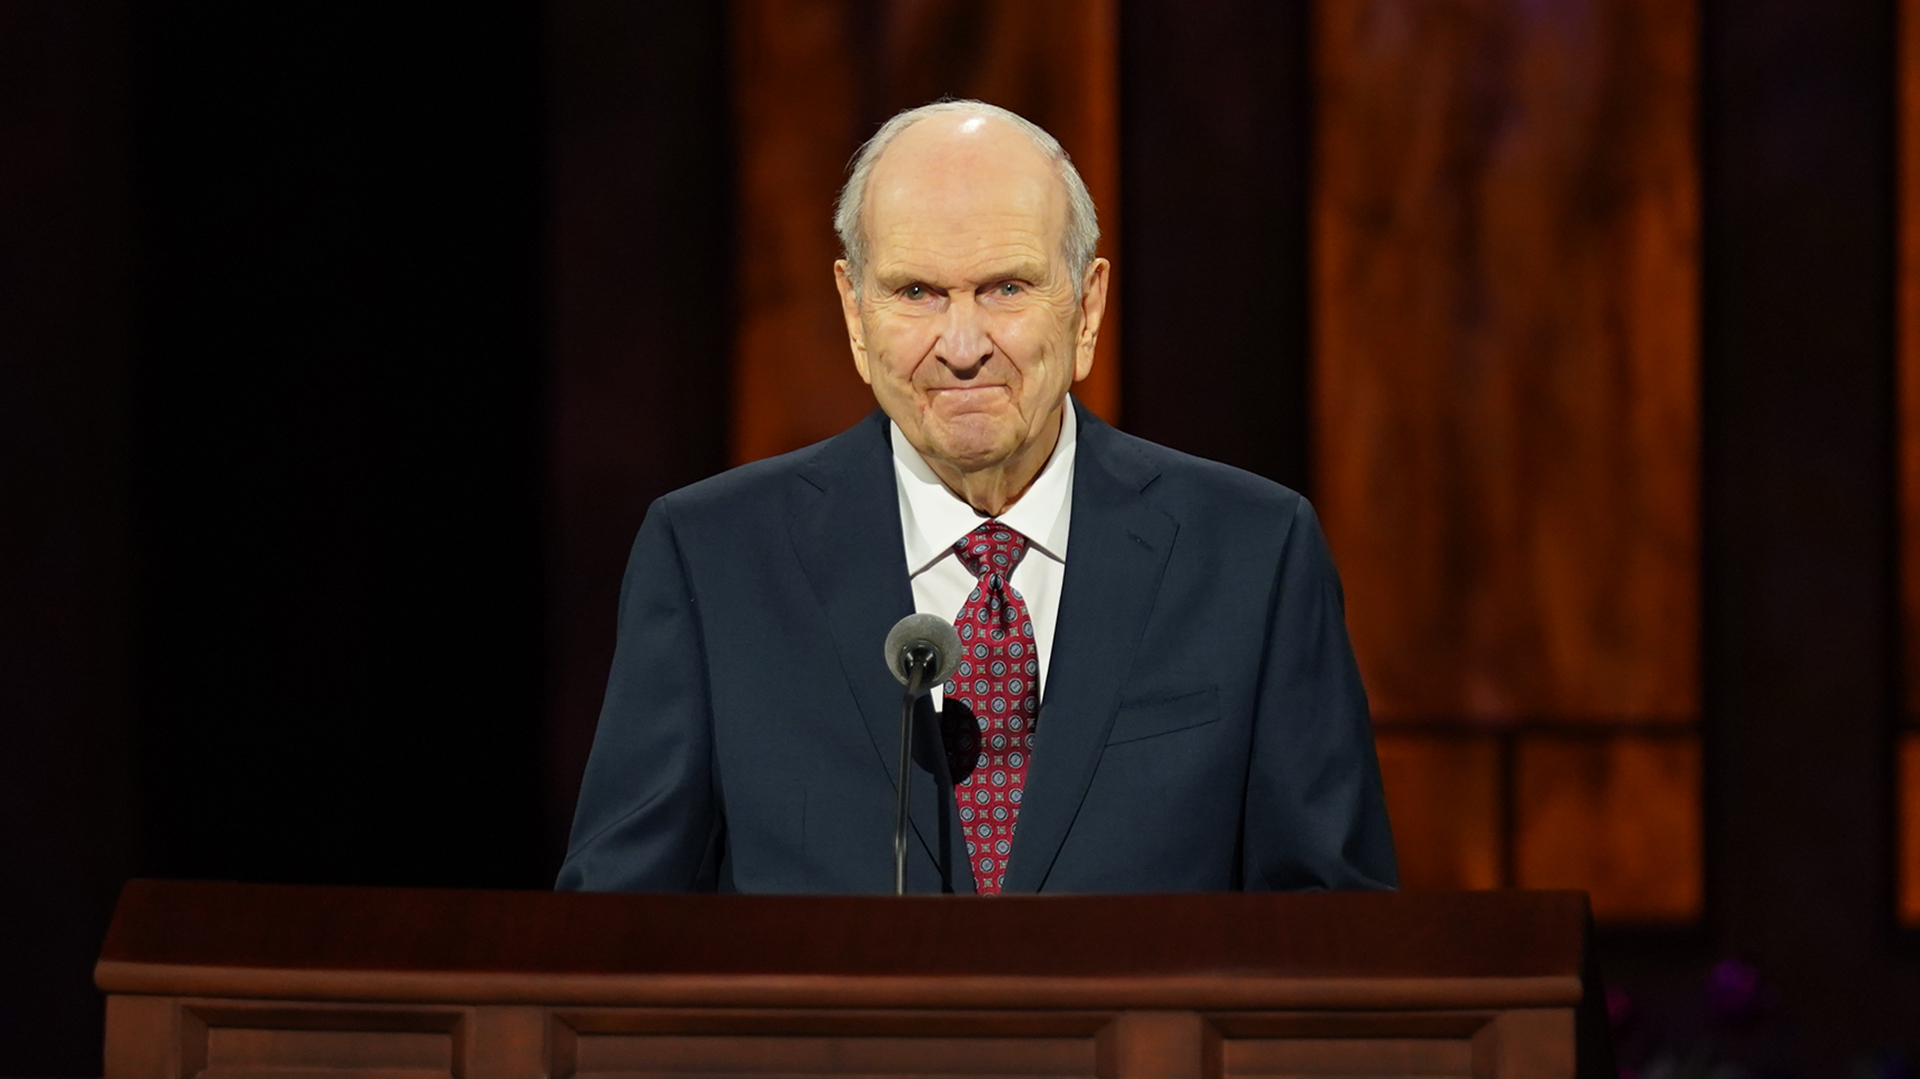 President Nelson's 'dynamic' presidency marked by 70 changes within the